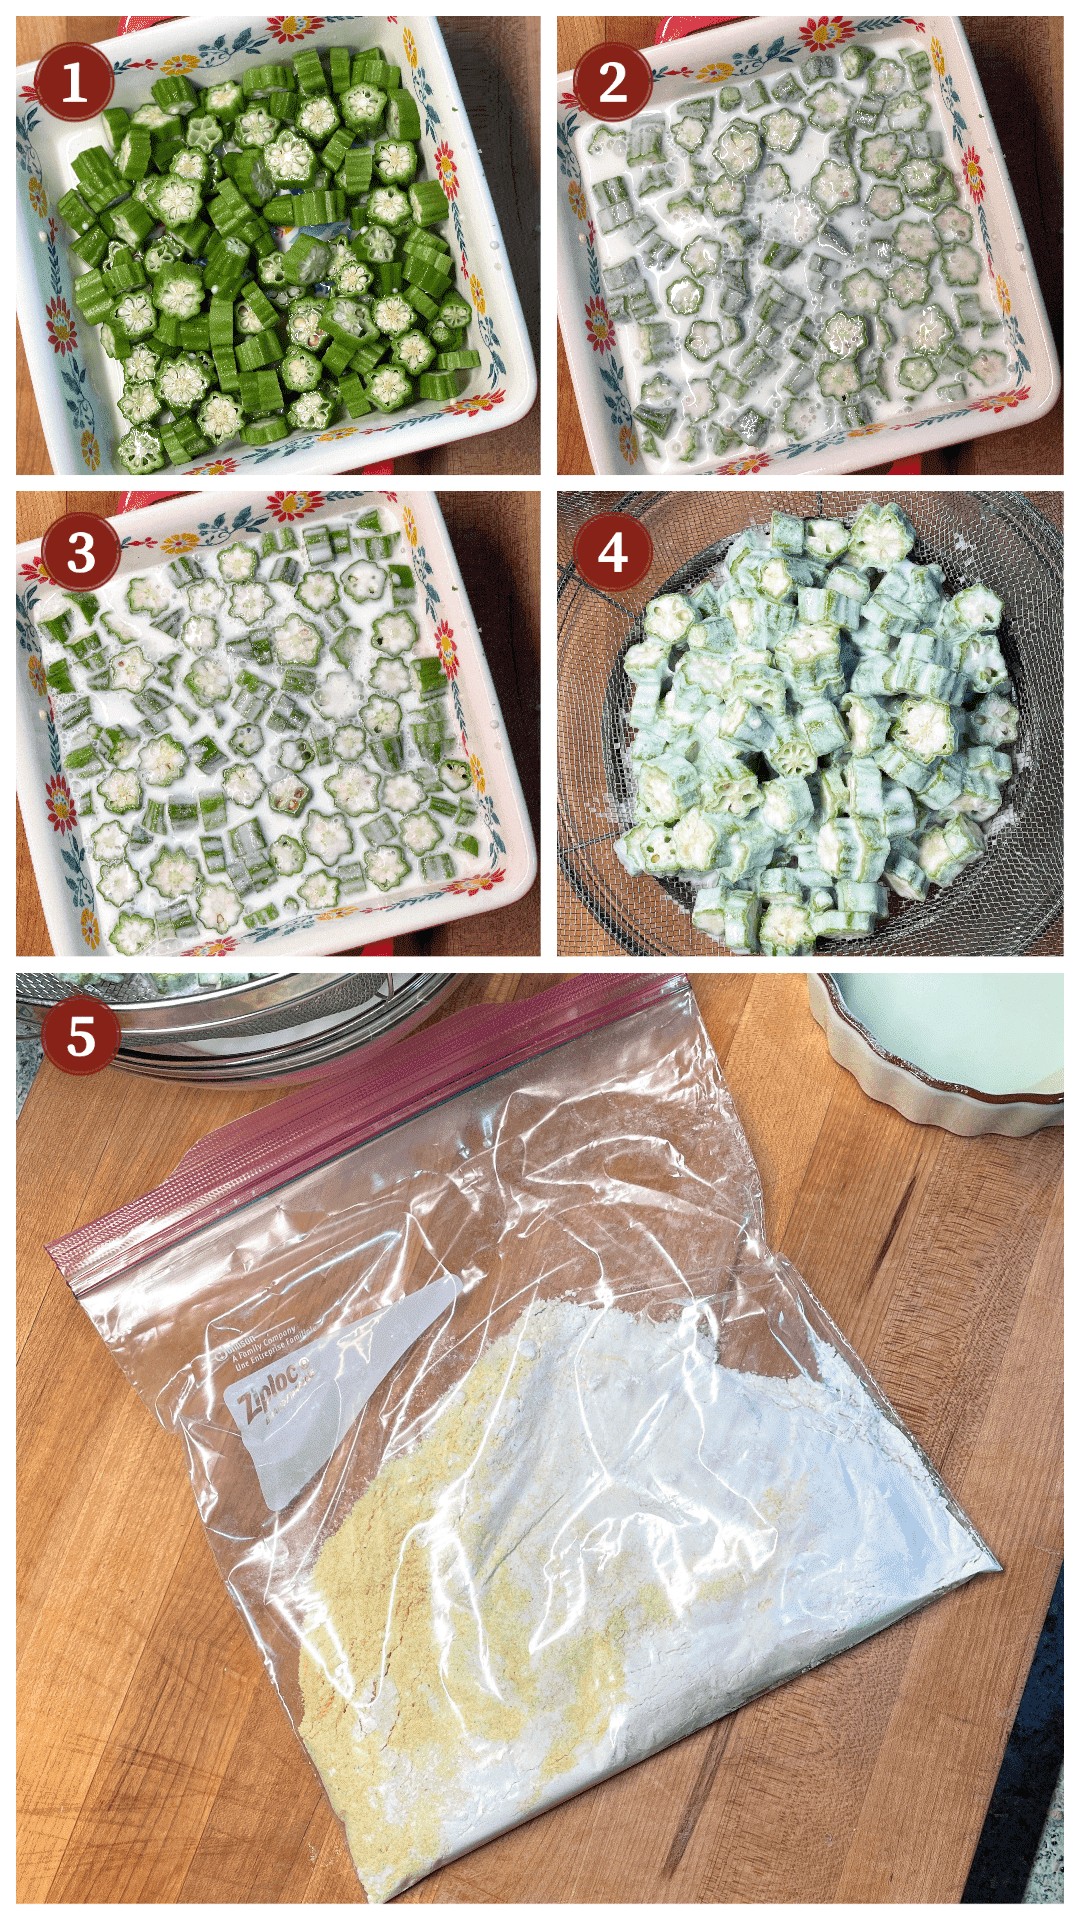 A collage of images showing how to dredge okra in buttermilk before frying it, steps 1 - 5.